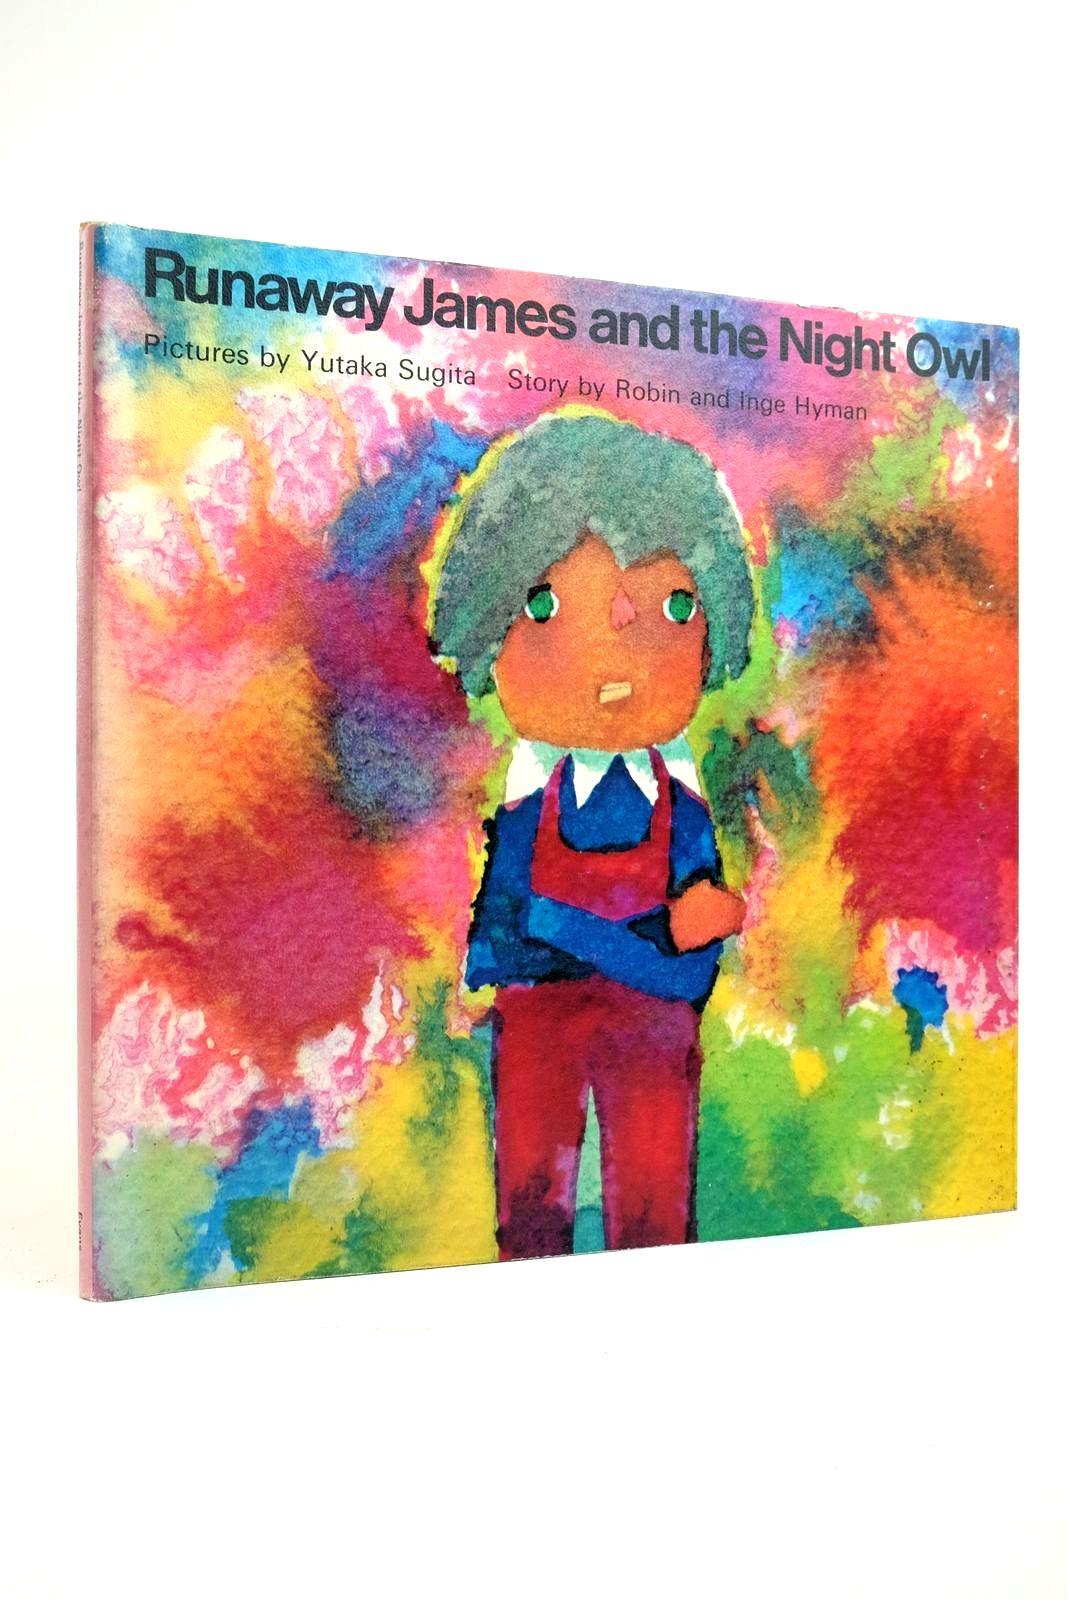 Photo of RUNAWAY JAMES AND THE NIGHT OWL- Stock Number: 2135574